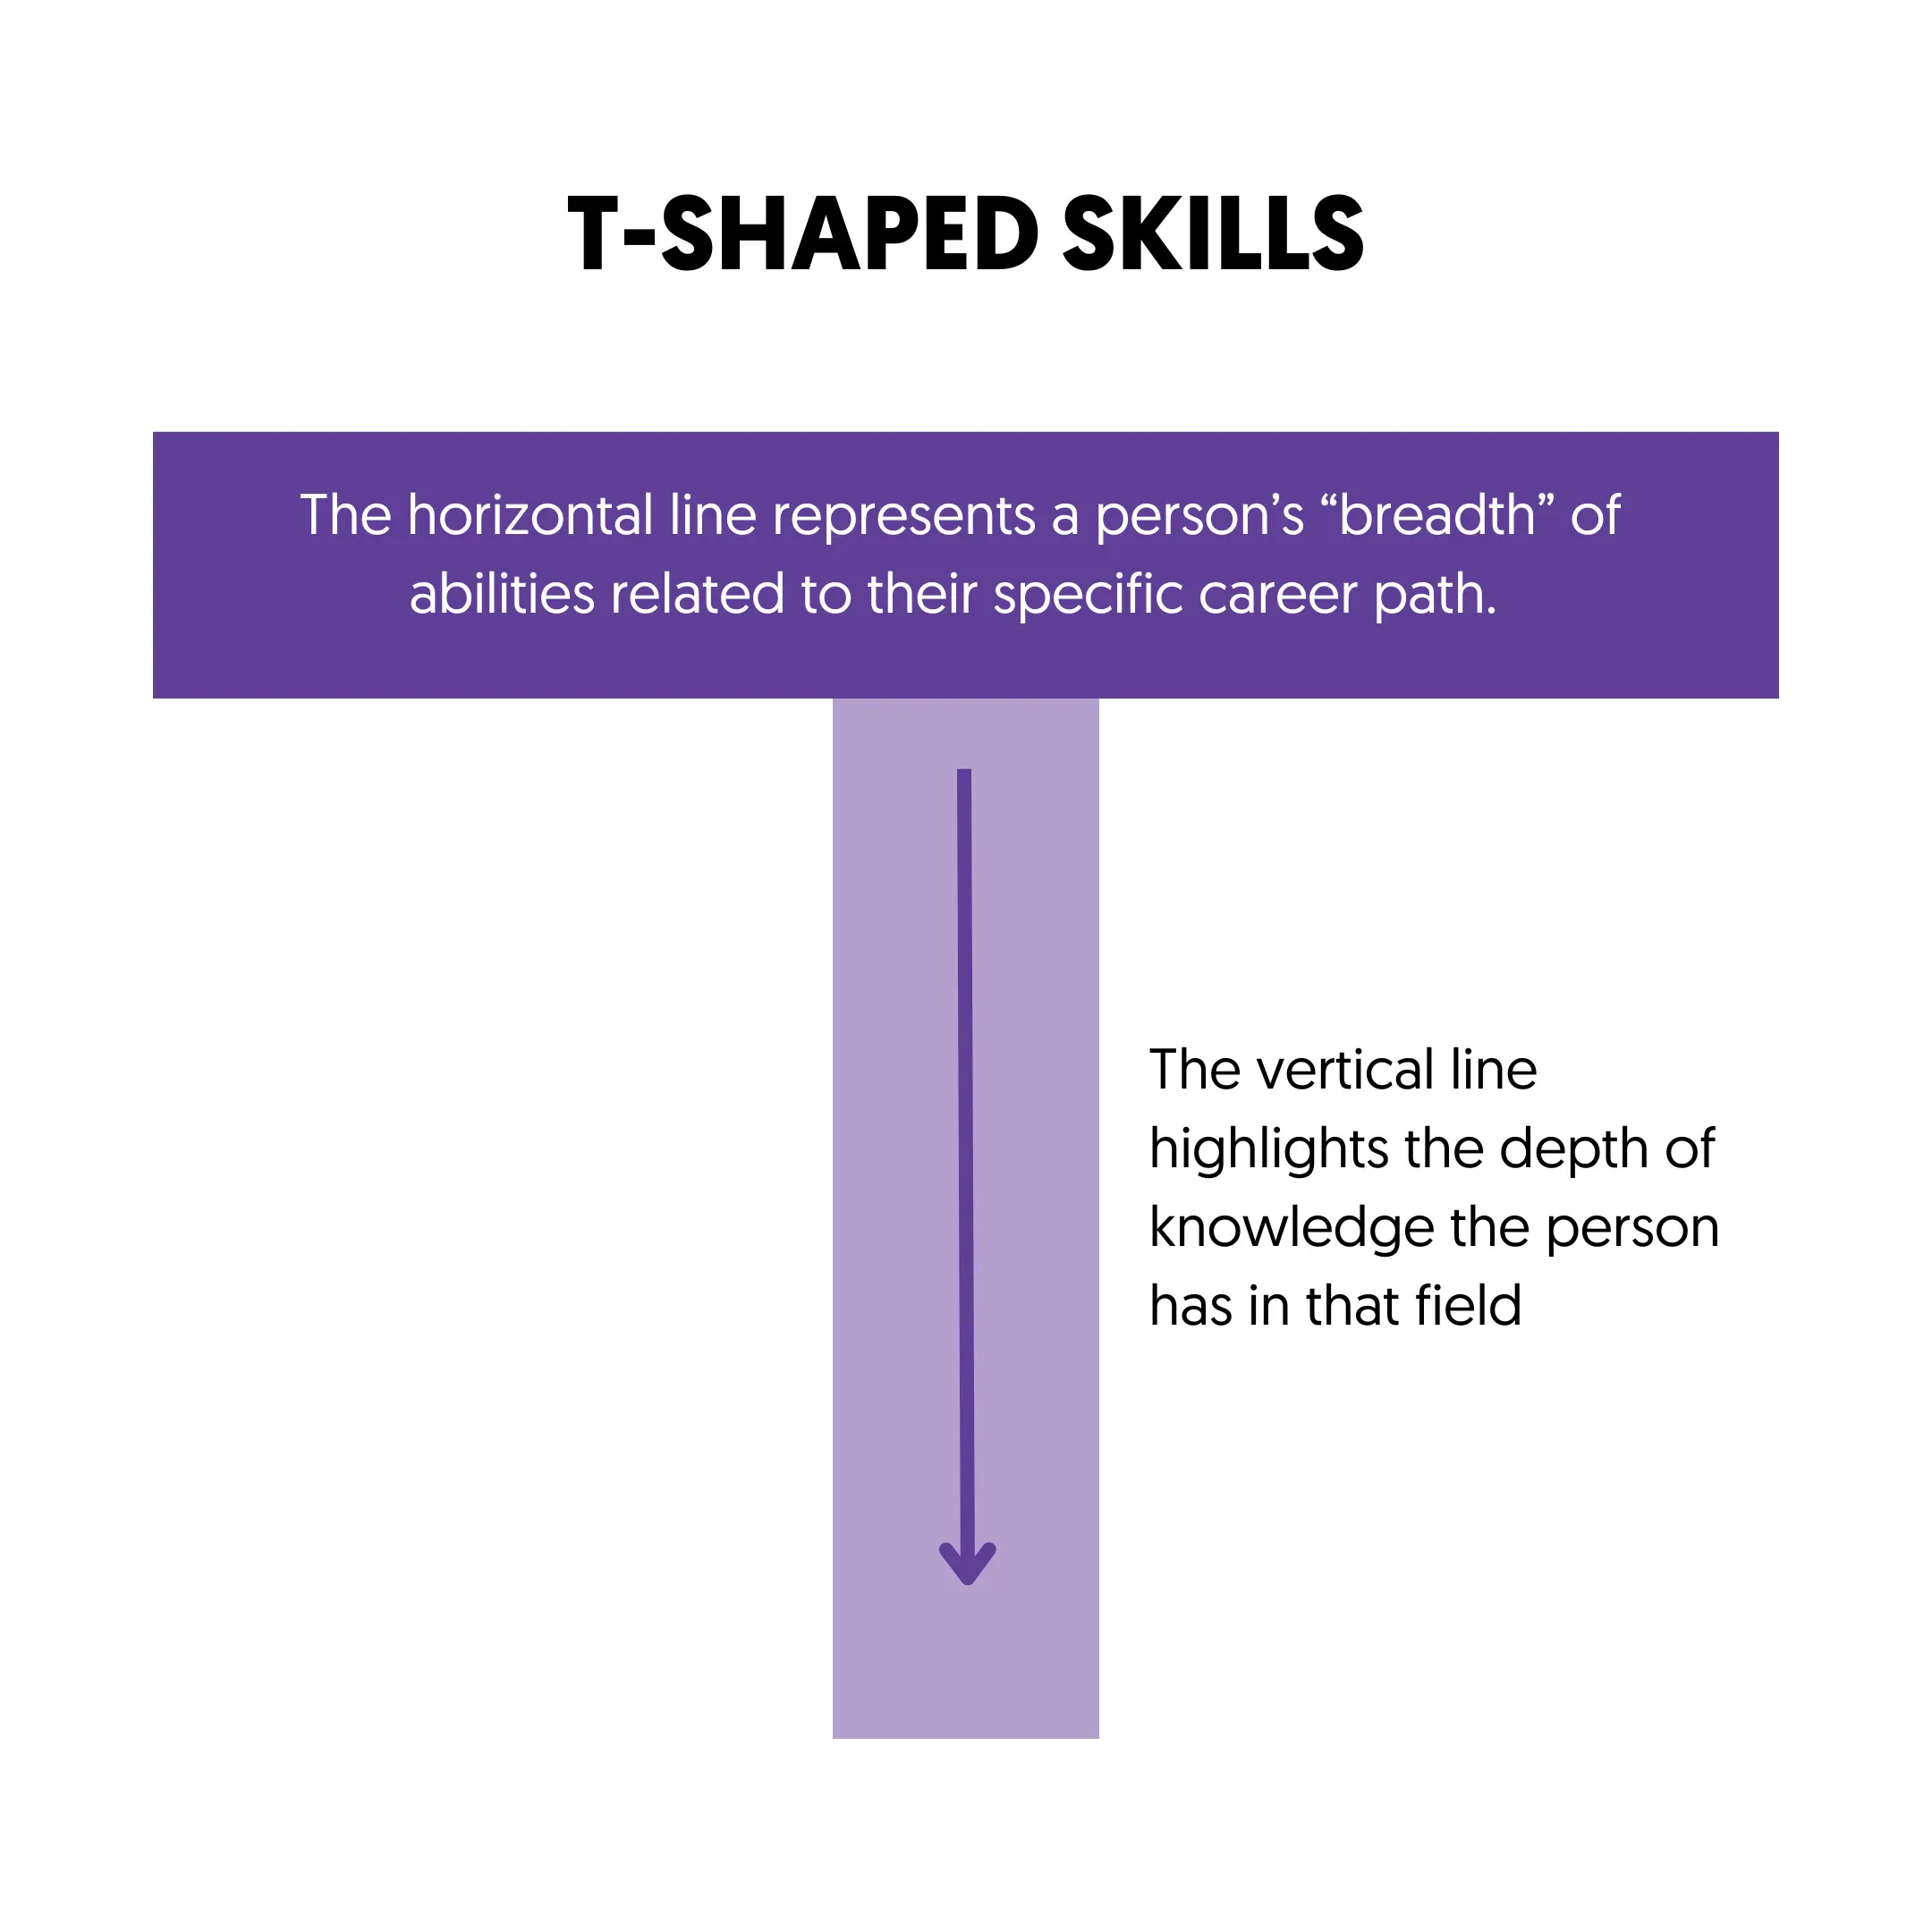 Are you a T-Shaped Marketer? And which type?